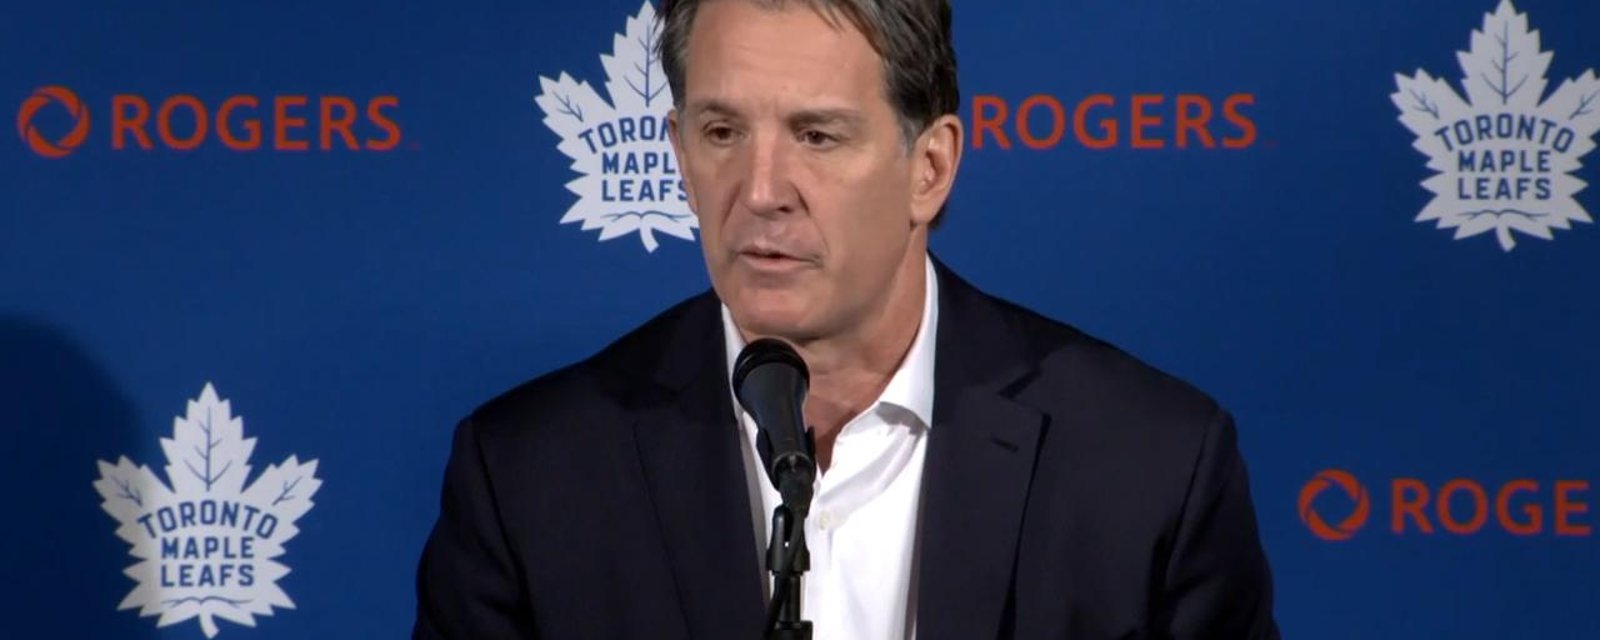 Maple Leafs' Shanahan fires member of staff Imoo after background check!